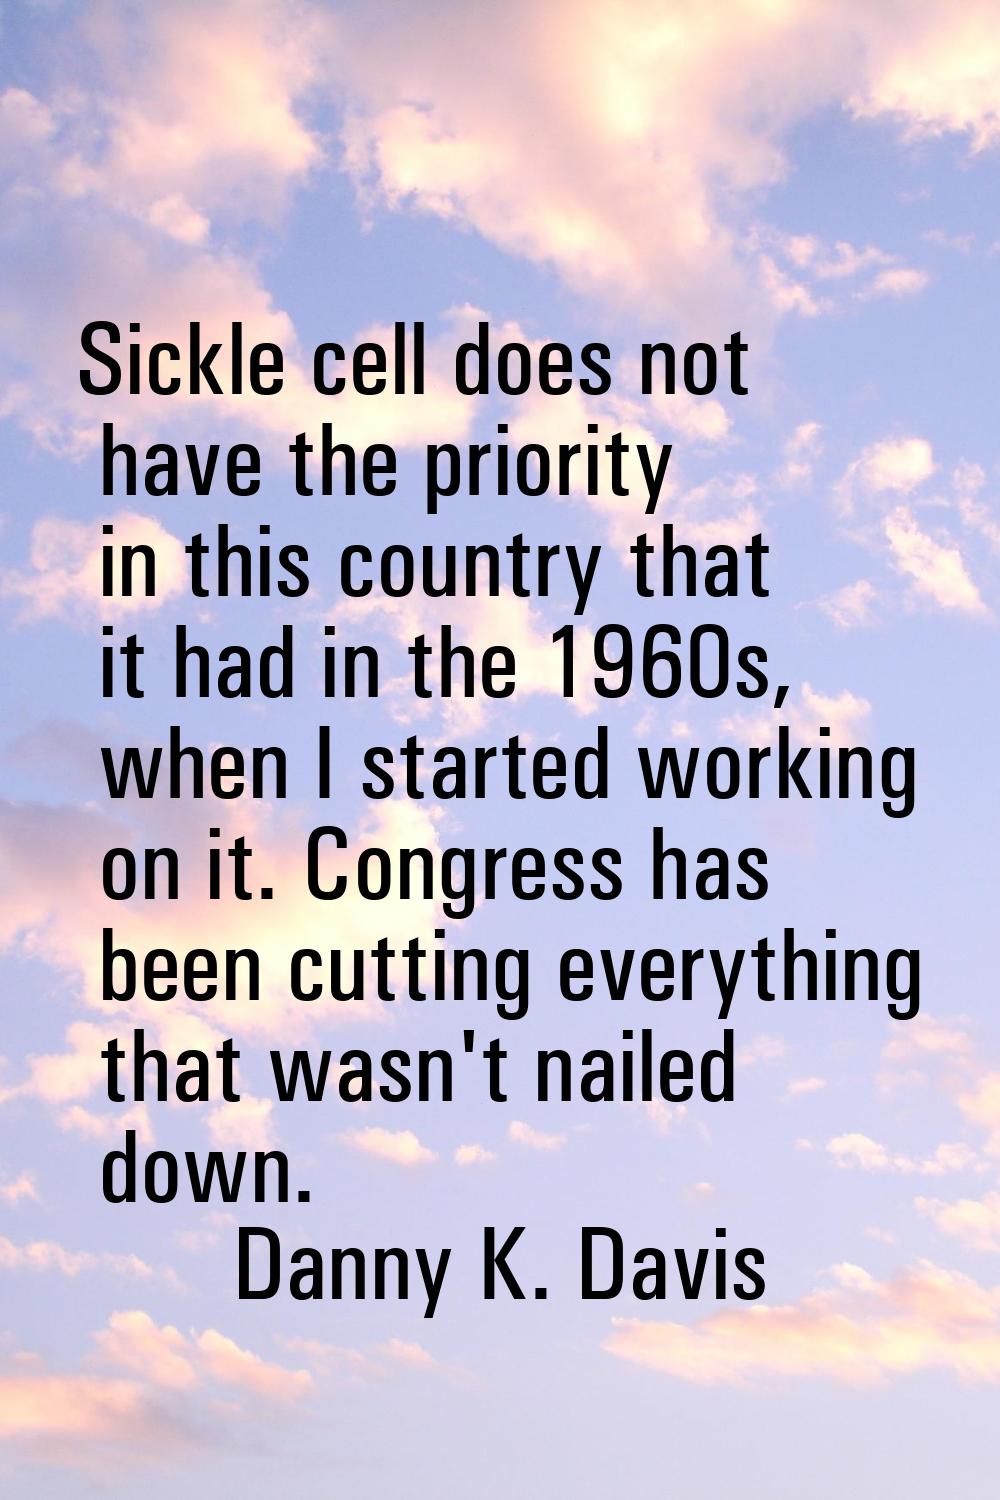 Sickle cell does not have the priority in this country that it had in the 1960s, when I started wor